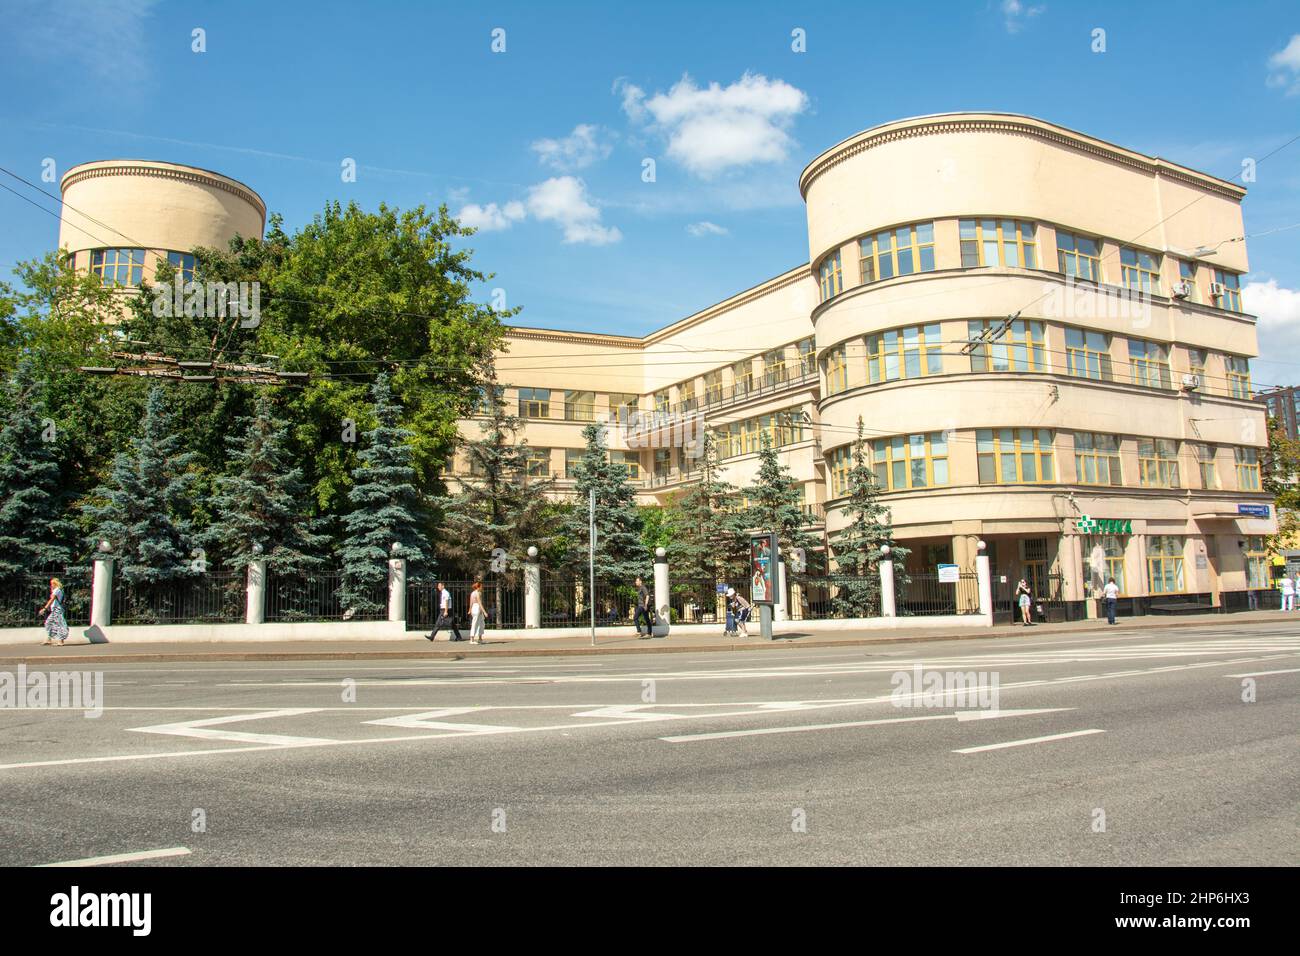 Wavy facade of the Polyclinic of People's Commissariat of Communication Routes of the Soviet Union on New Basmannaya street in Moscow Stock Photo